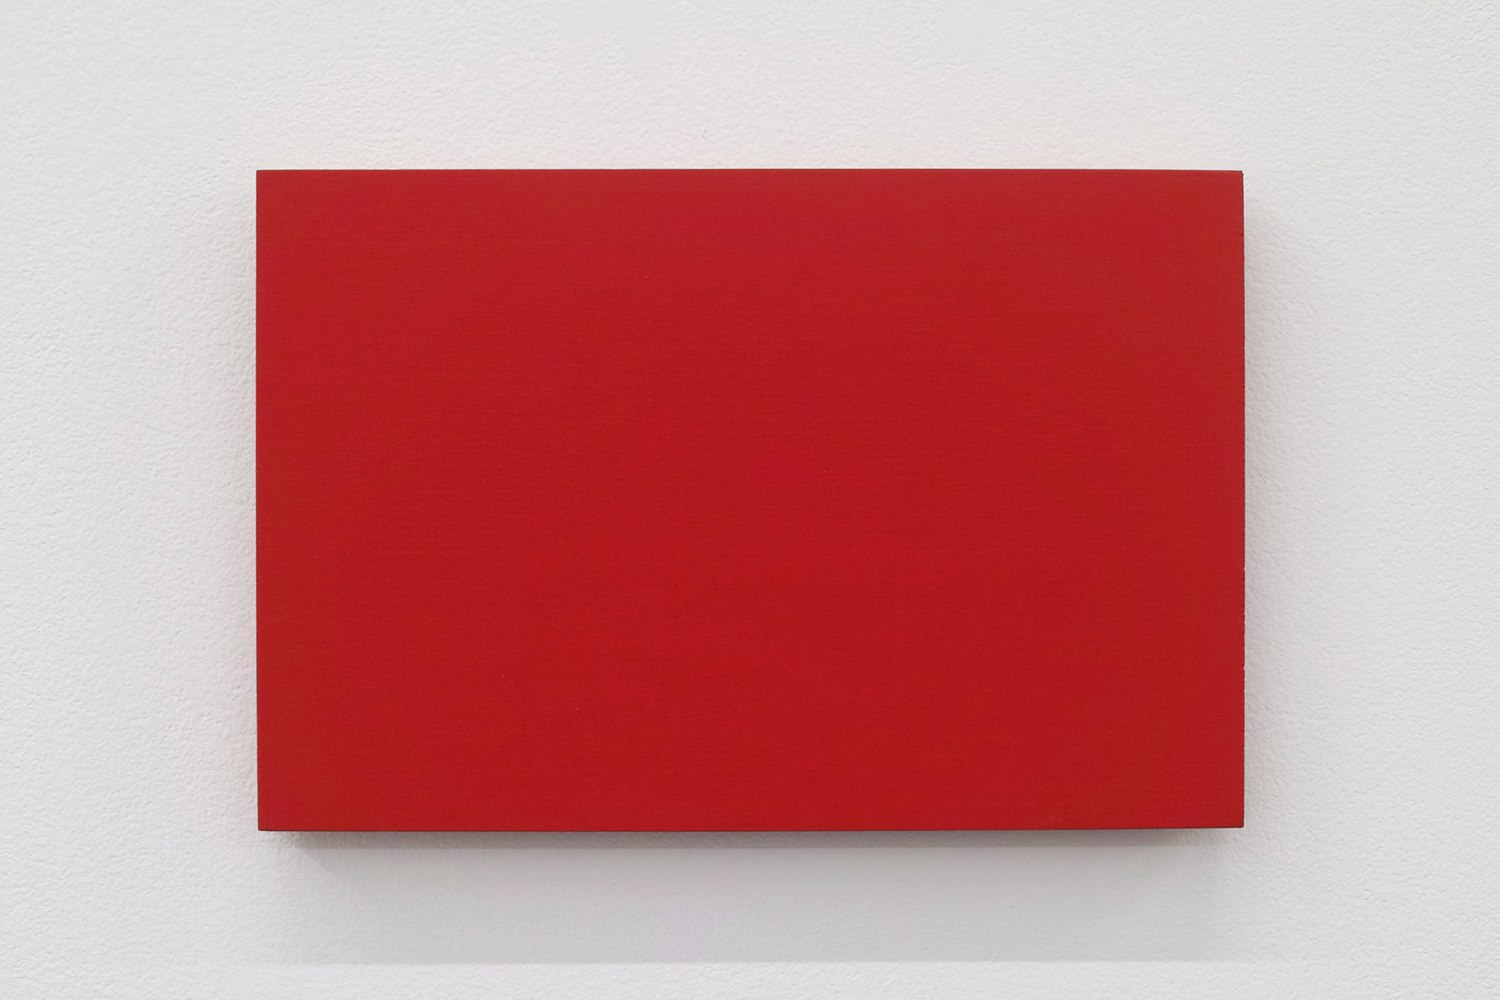 Text No. 572｜pigment, acrylic on plywood｜150 x 100 x 12 mm｜2006<br>¥50,000 - 150,000